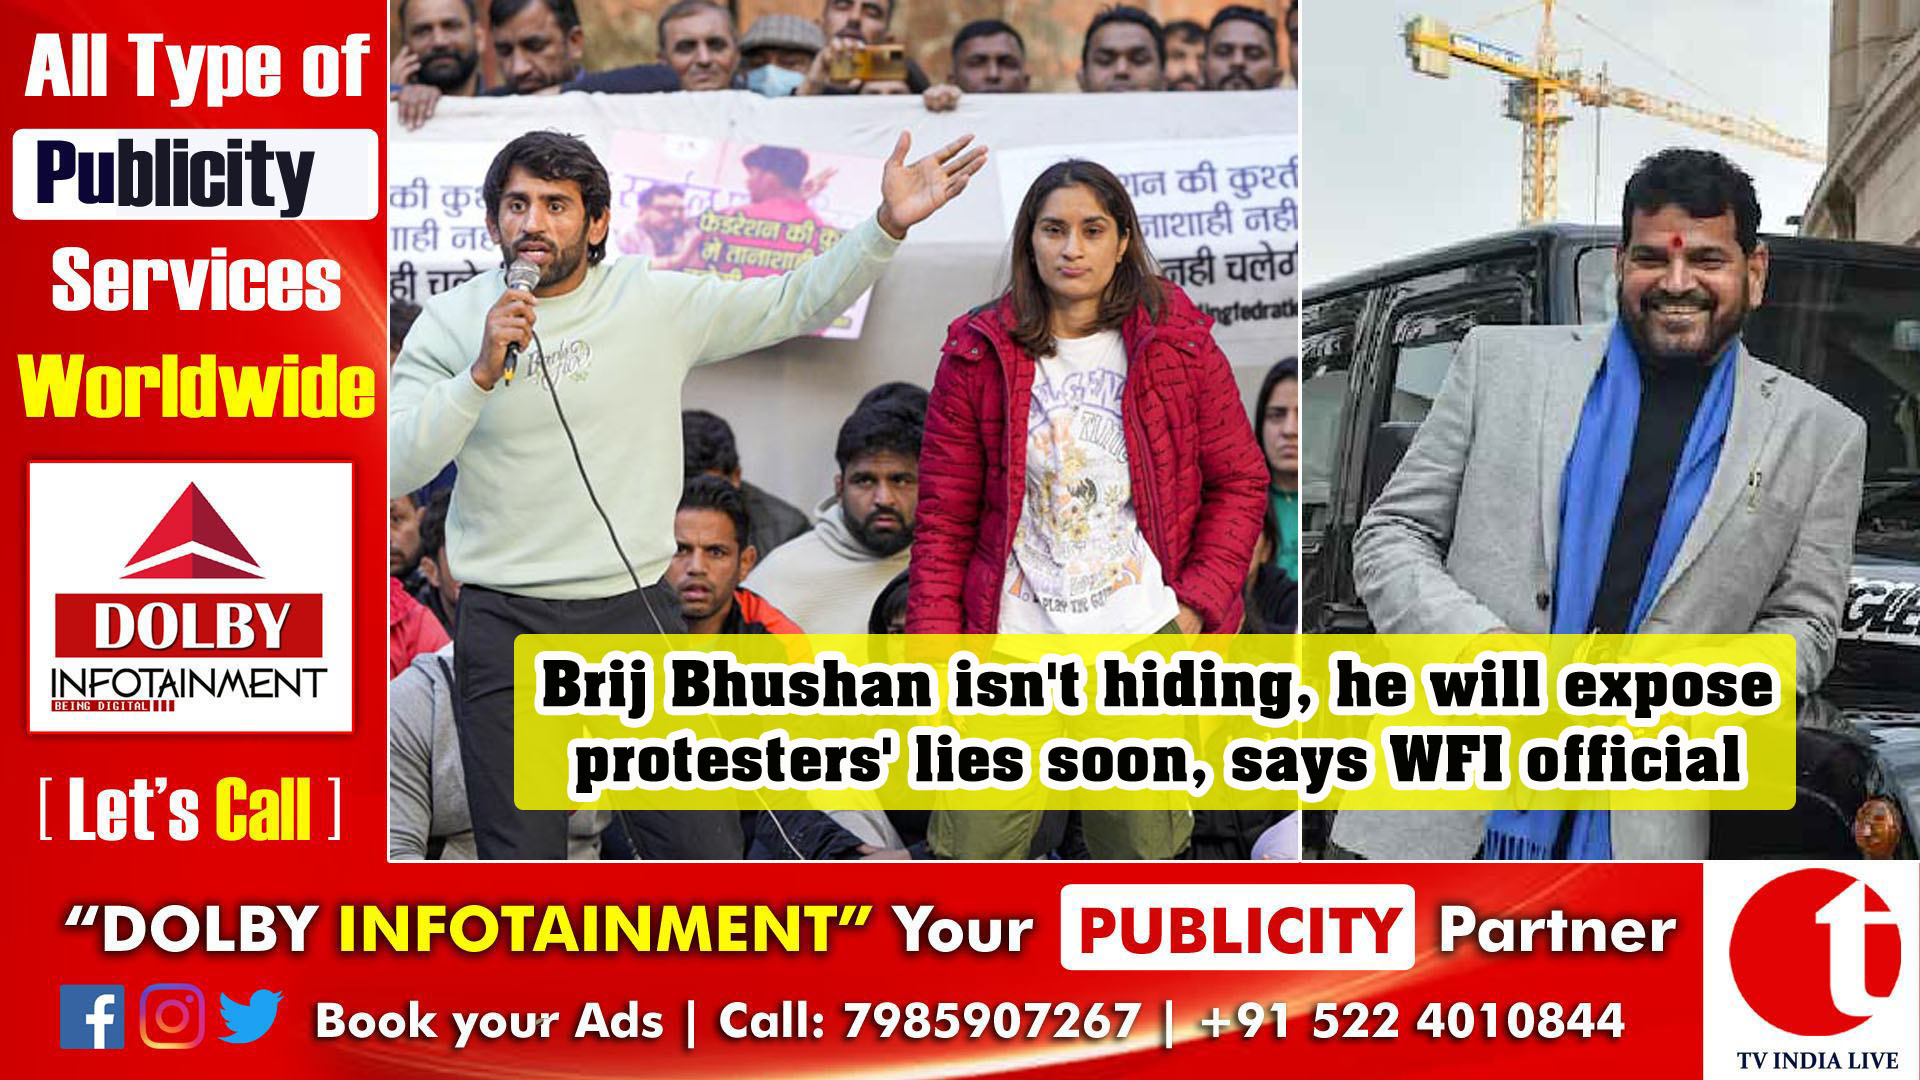 Brij Bhushan isn't hiding, he will expose protesters' lies soon, says WFI official